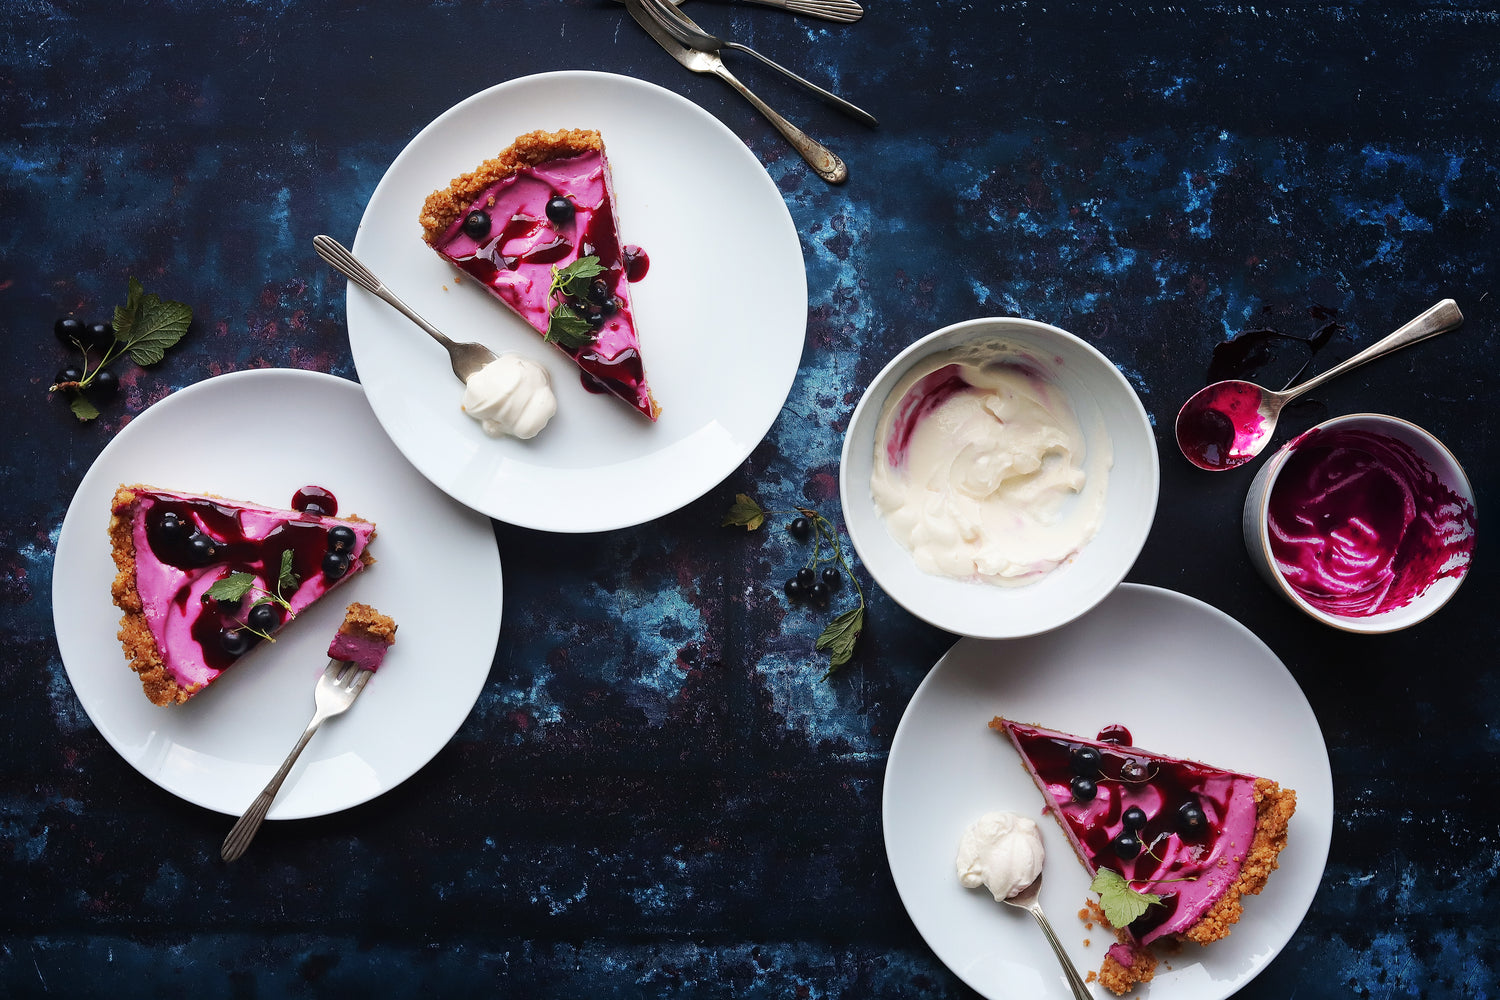 Blackcurrant cheesecake, 6 ways to style cake - a personal food styling and cake photography challenge!